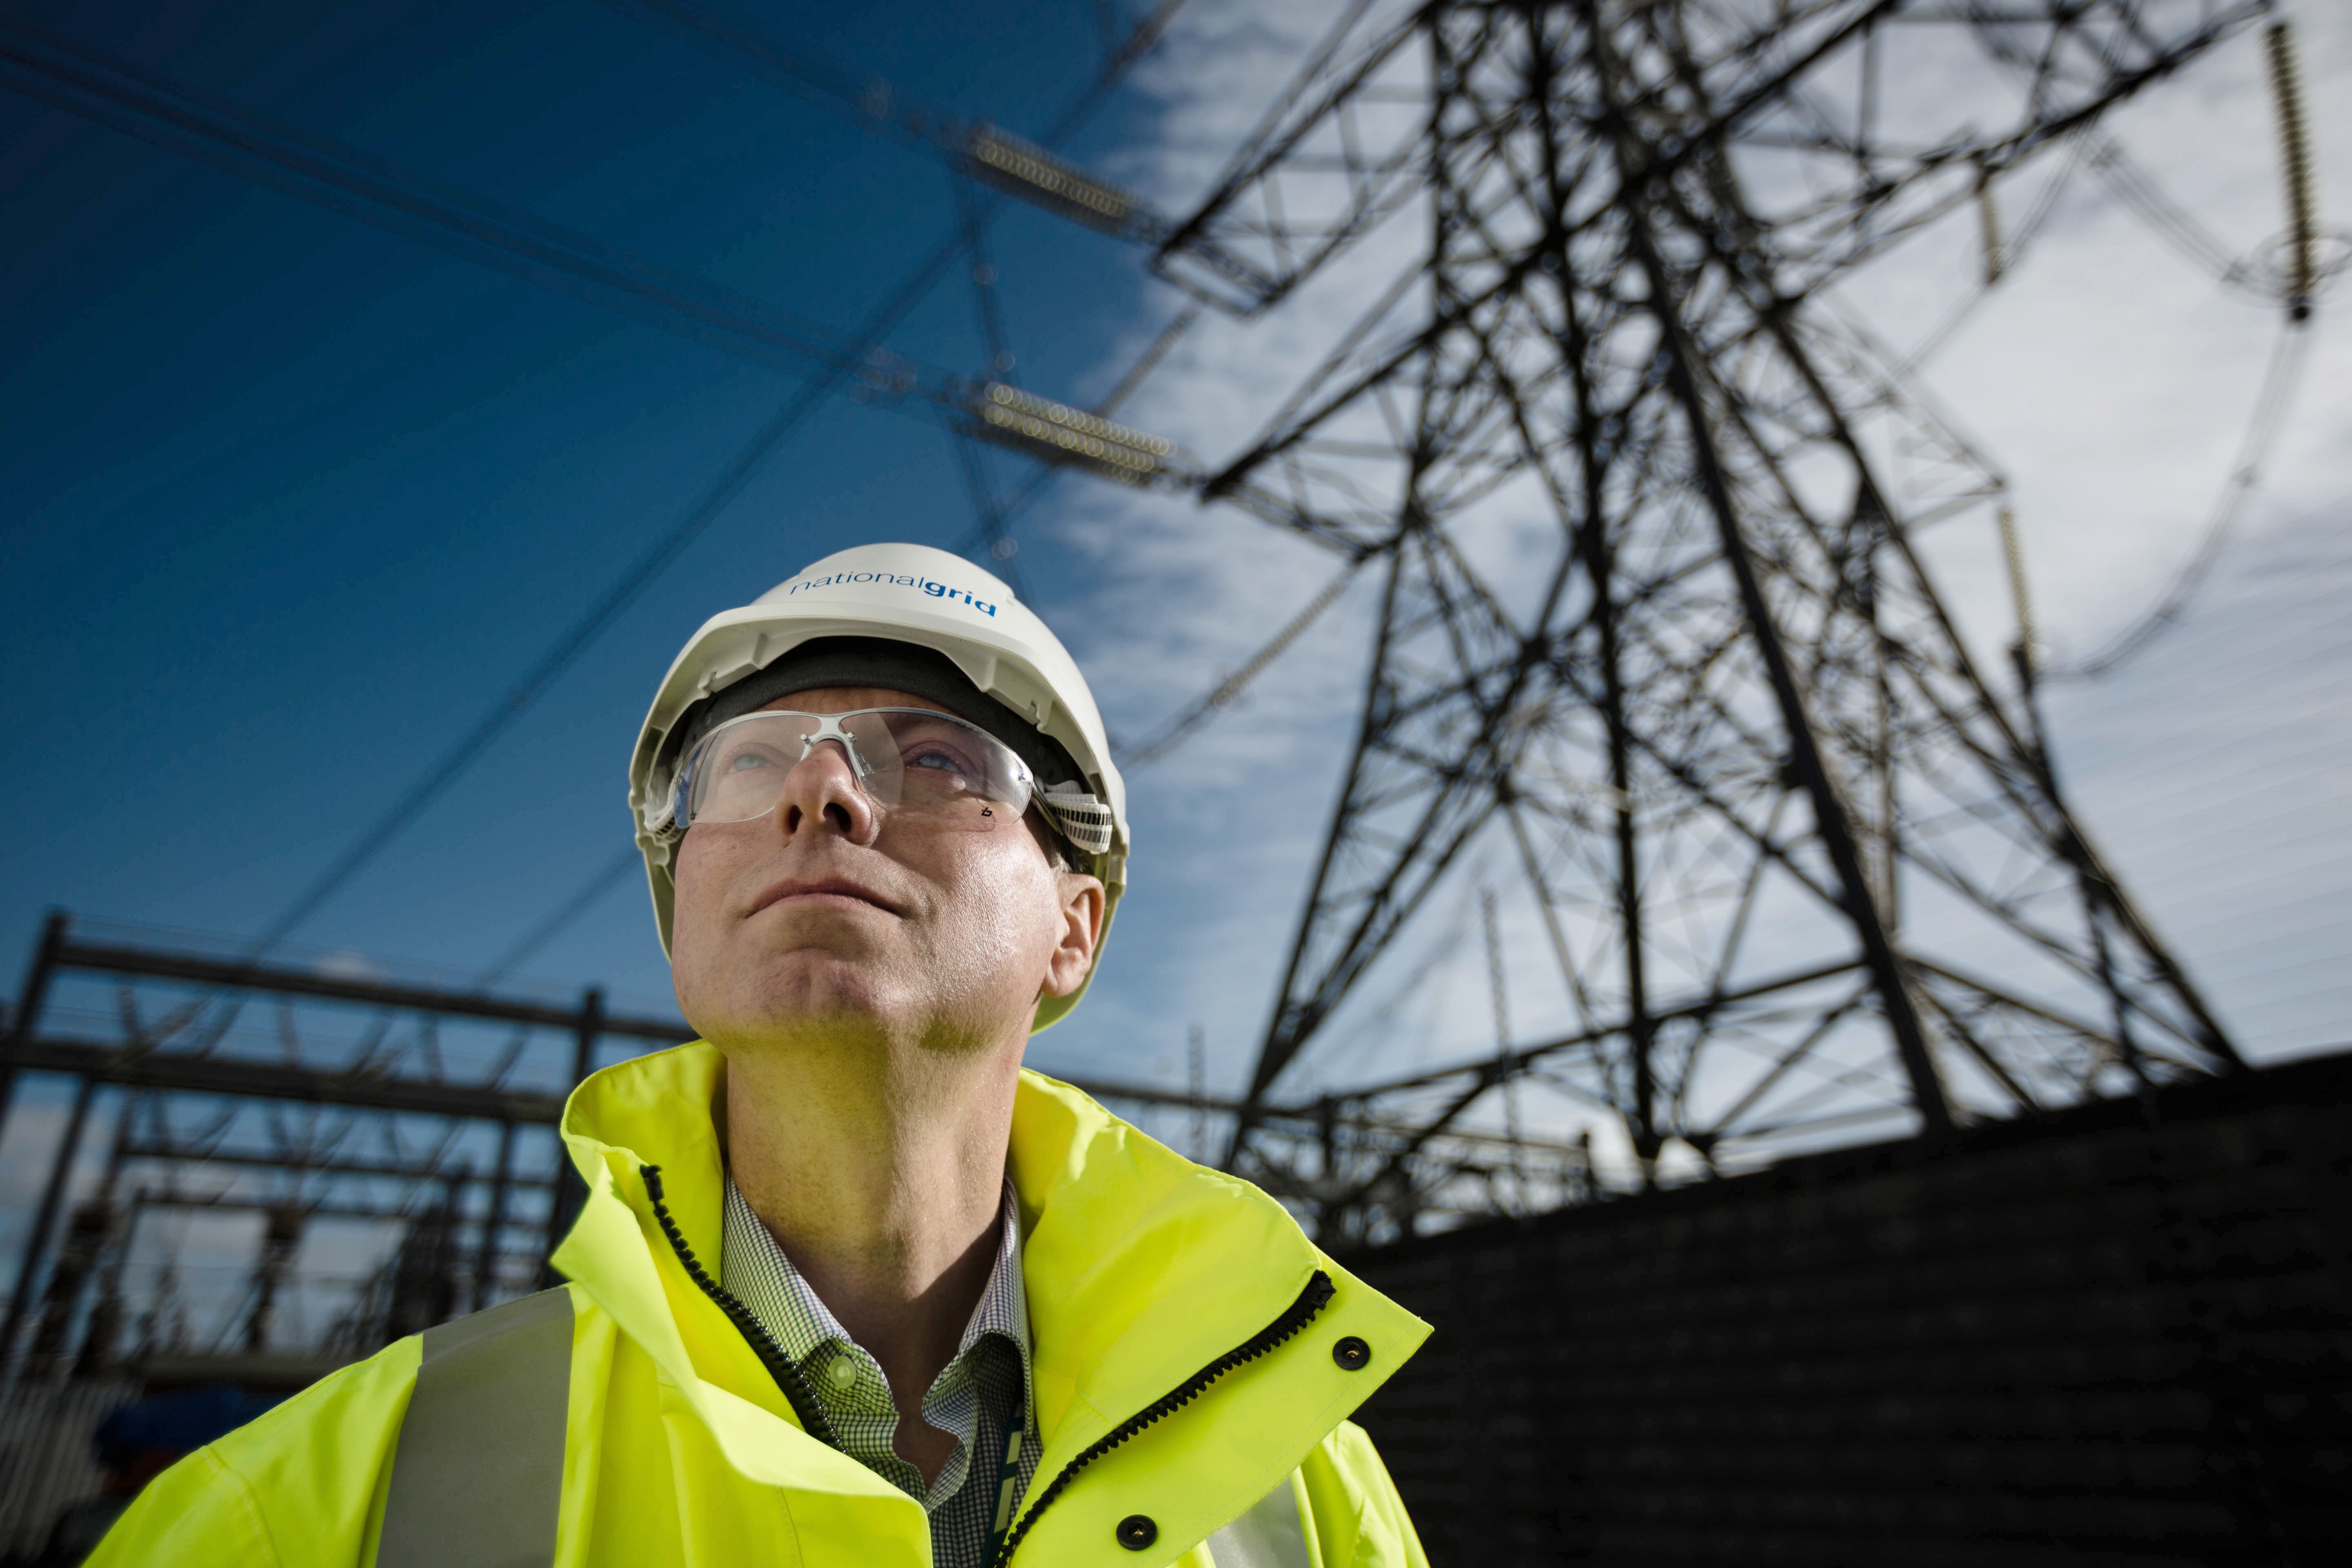 National Grid Project Manager Paul Daniels portrait with electricity pylon in the backrground